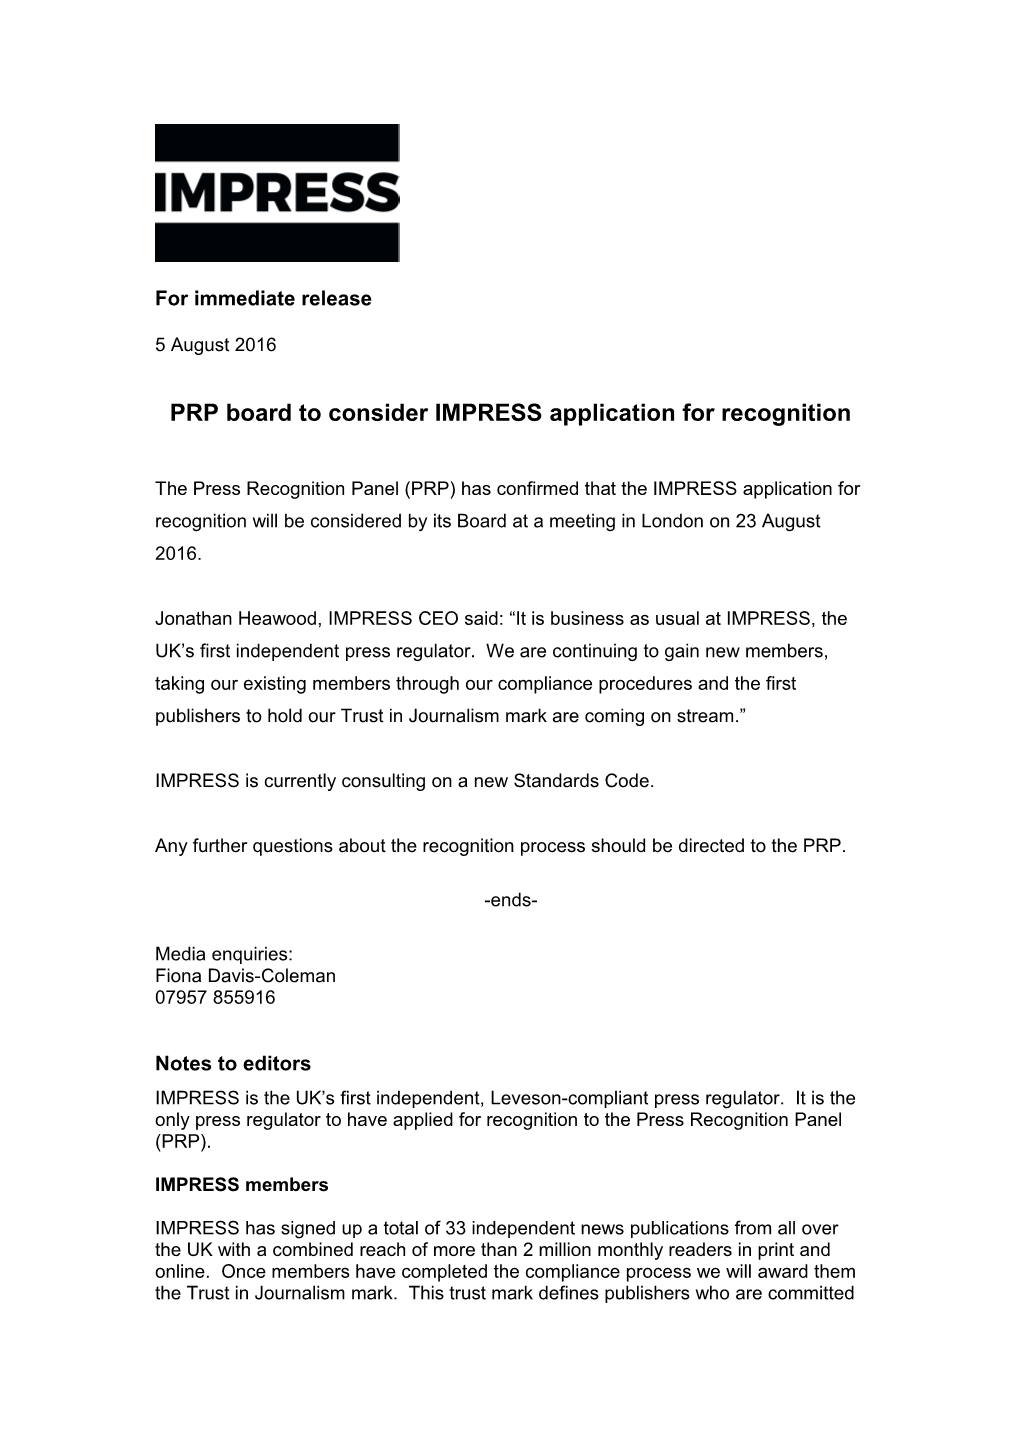 PRP Board to Consider IMPRESS Application for Recognition